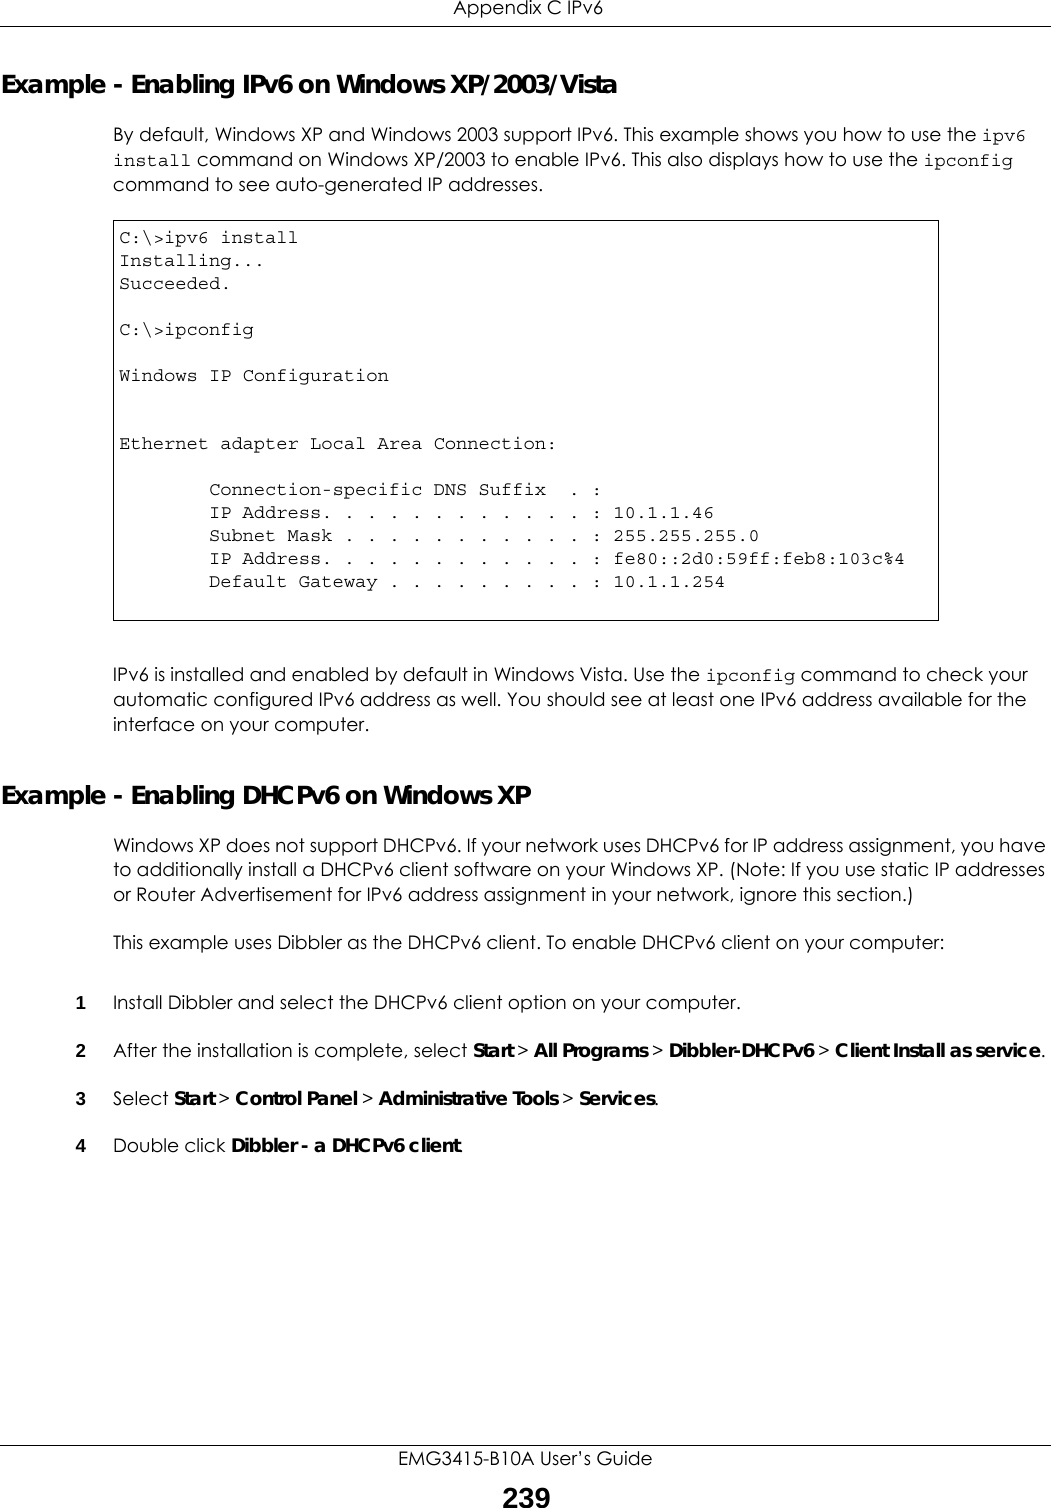  Appendix C IPv6EMG3415-B10A User’s Guide239Example - Enabling IPv6 on Windows XP/2003/VistaBy default, Windows XP and Windows 2003 support IPv6. This example shows you how to use the ipv6 install command on Windows XP/2003 to enable IPv6. This also displays how to use the ipconfig command to see auto-generated IP addresses.IPv6 is installed and enabled by default in Windows Vista. Use the ipconfig command to check your automatic configured IPv6 address as well. You should see at least one IPv6 address available for the interface on your computer.Example - Enabling DHCPv6 on Windows XPWindows XP does not support DHCPv6. If your network uses DHCPv6 for IP address assignment, you have to additionally install a DHCPv6 client software on your Windows XP. (Note: If you use static IP addresses or Router Advertisement for IPv6 address assignment in your network, ignore this section.)This example uses Dibbler as the DHCPv6 client. To enable DHCPv6 client on your computer:1Install Dibbler and select the DHCPv6 client option on your computer.2After the installation is complete, select Start &gt; All Programs &gt; Dibbler-DHCPv6 &gt; Client Install as service.3Select Start &gt; Control Panel &gt; Administrative Tools &gt; Services.4Double click Dibbler - a DHCPv6 client.C:\&gt;ipv6 installInstalling...Succeeded.C:\&gt;ipconfigWindows IP ConfigurationEthernet adapter Local Area Connection:        Connection-specific DNS Suffix  . :         IP Address. . . . . . . . . . . . : 10.1.1.46        Subnet Mask . . . . . . . . . . . : 255.255.255.0        IP Address. . . . . . . . . . . . : fe80::2d0:59ff:feb8:103c%4        Default Gateway . . . . . . . . . : 10.1.1.254